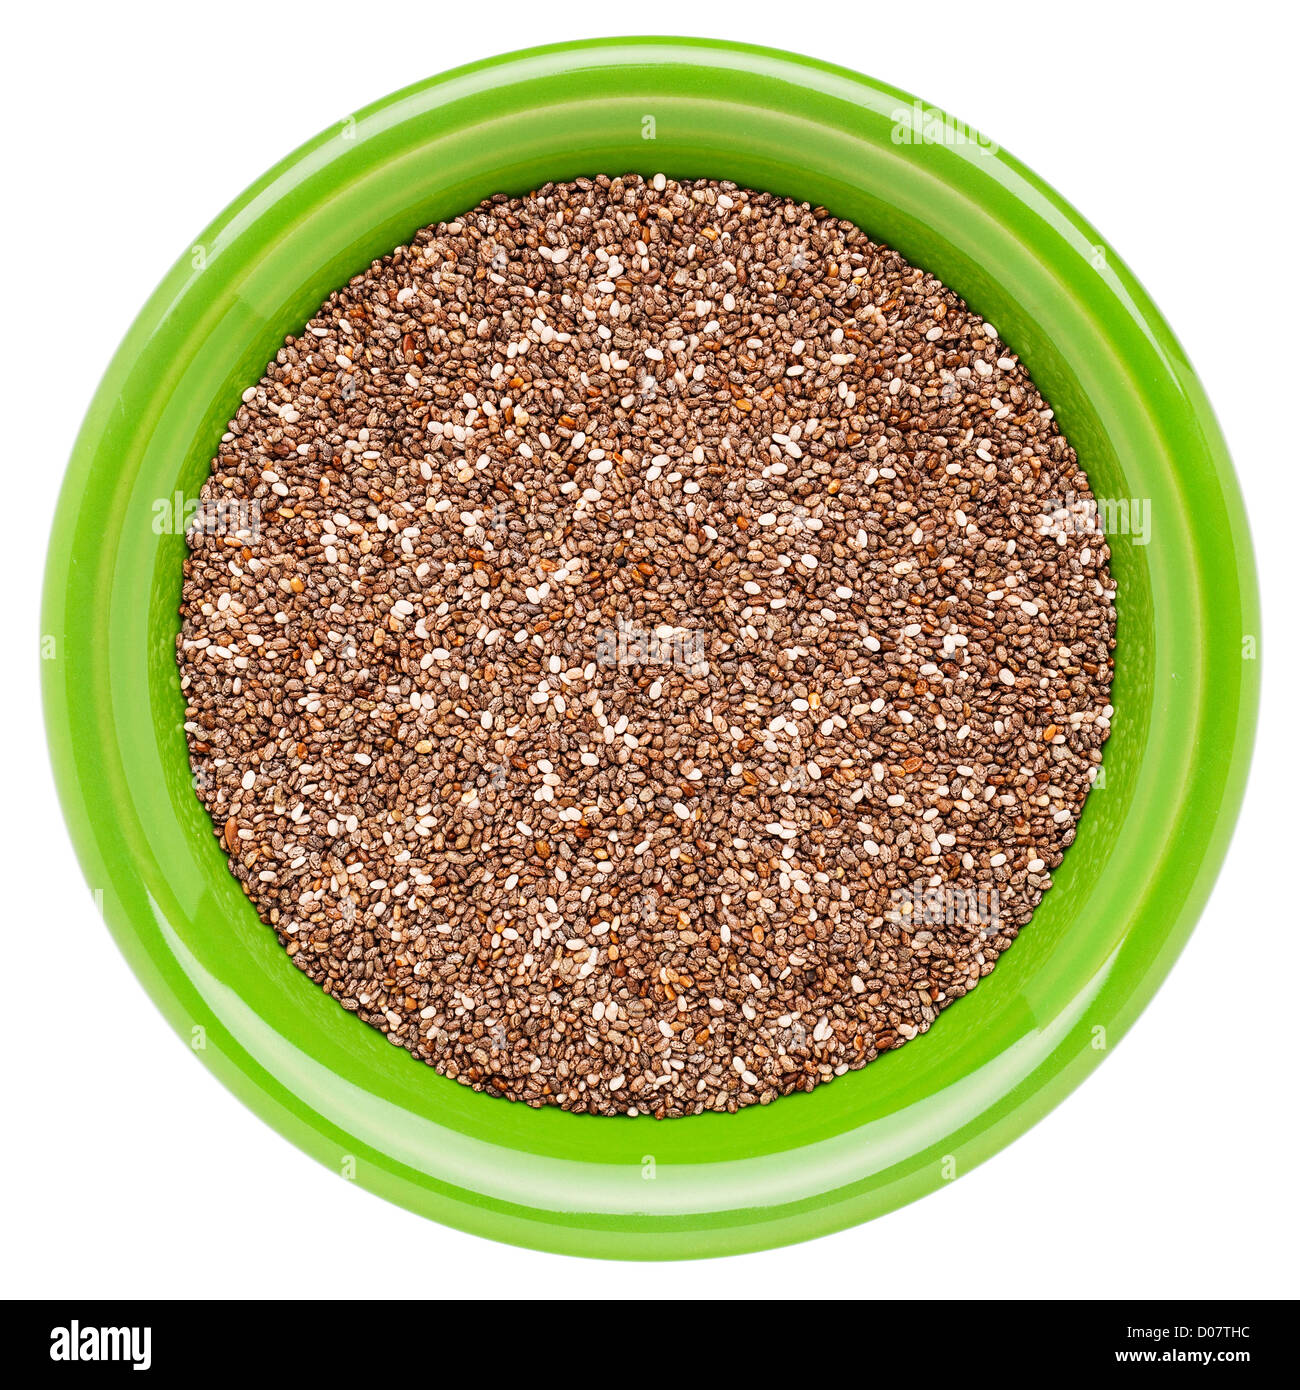 chia seeds in a green round ceramic bowl isolated on white Stock Photo